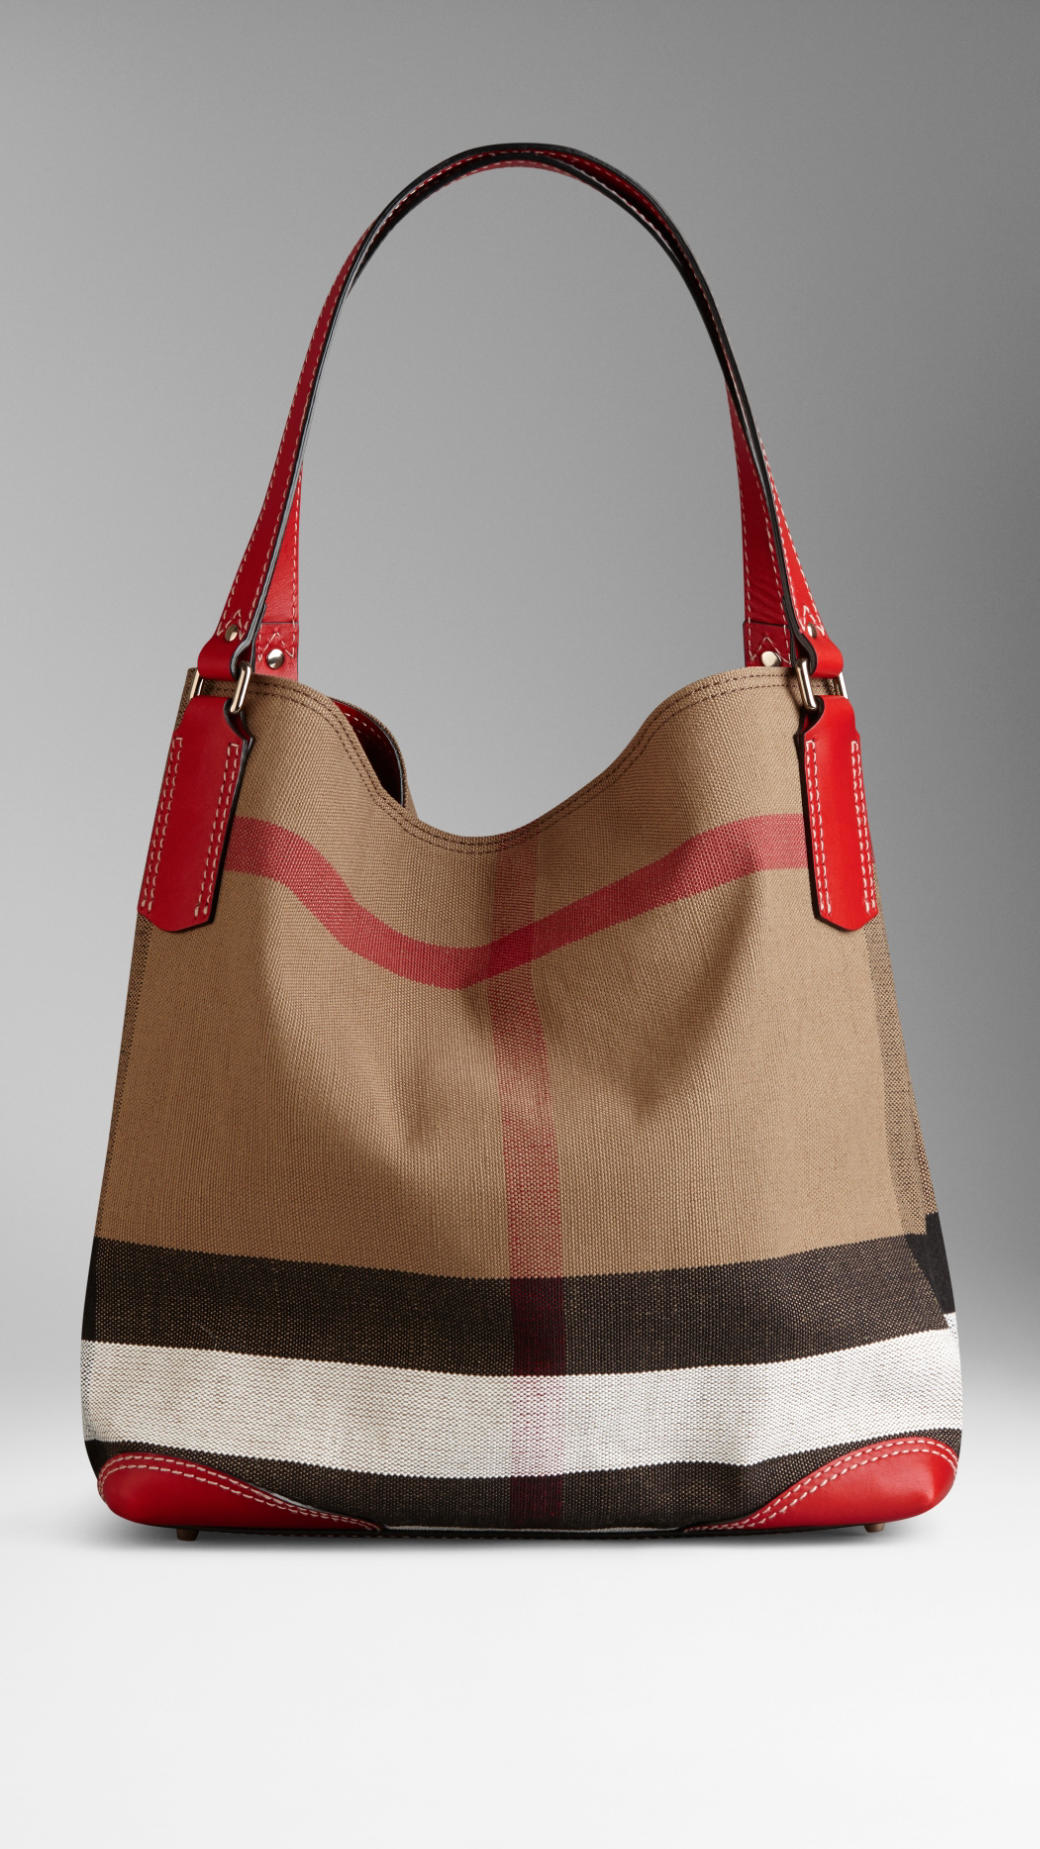 Burberry Medium Canvas Check Tote Bag in Red - Lyst